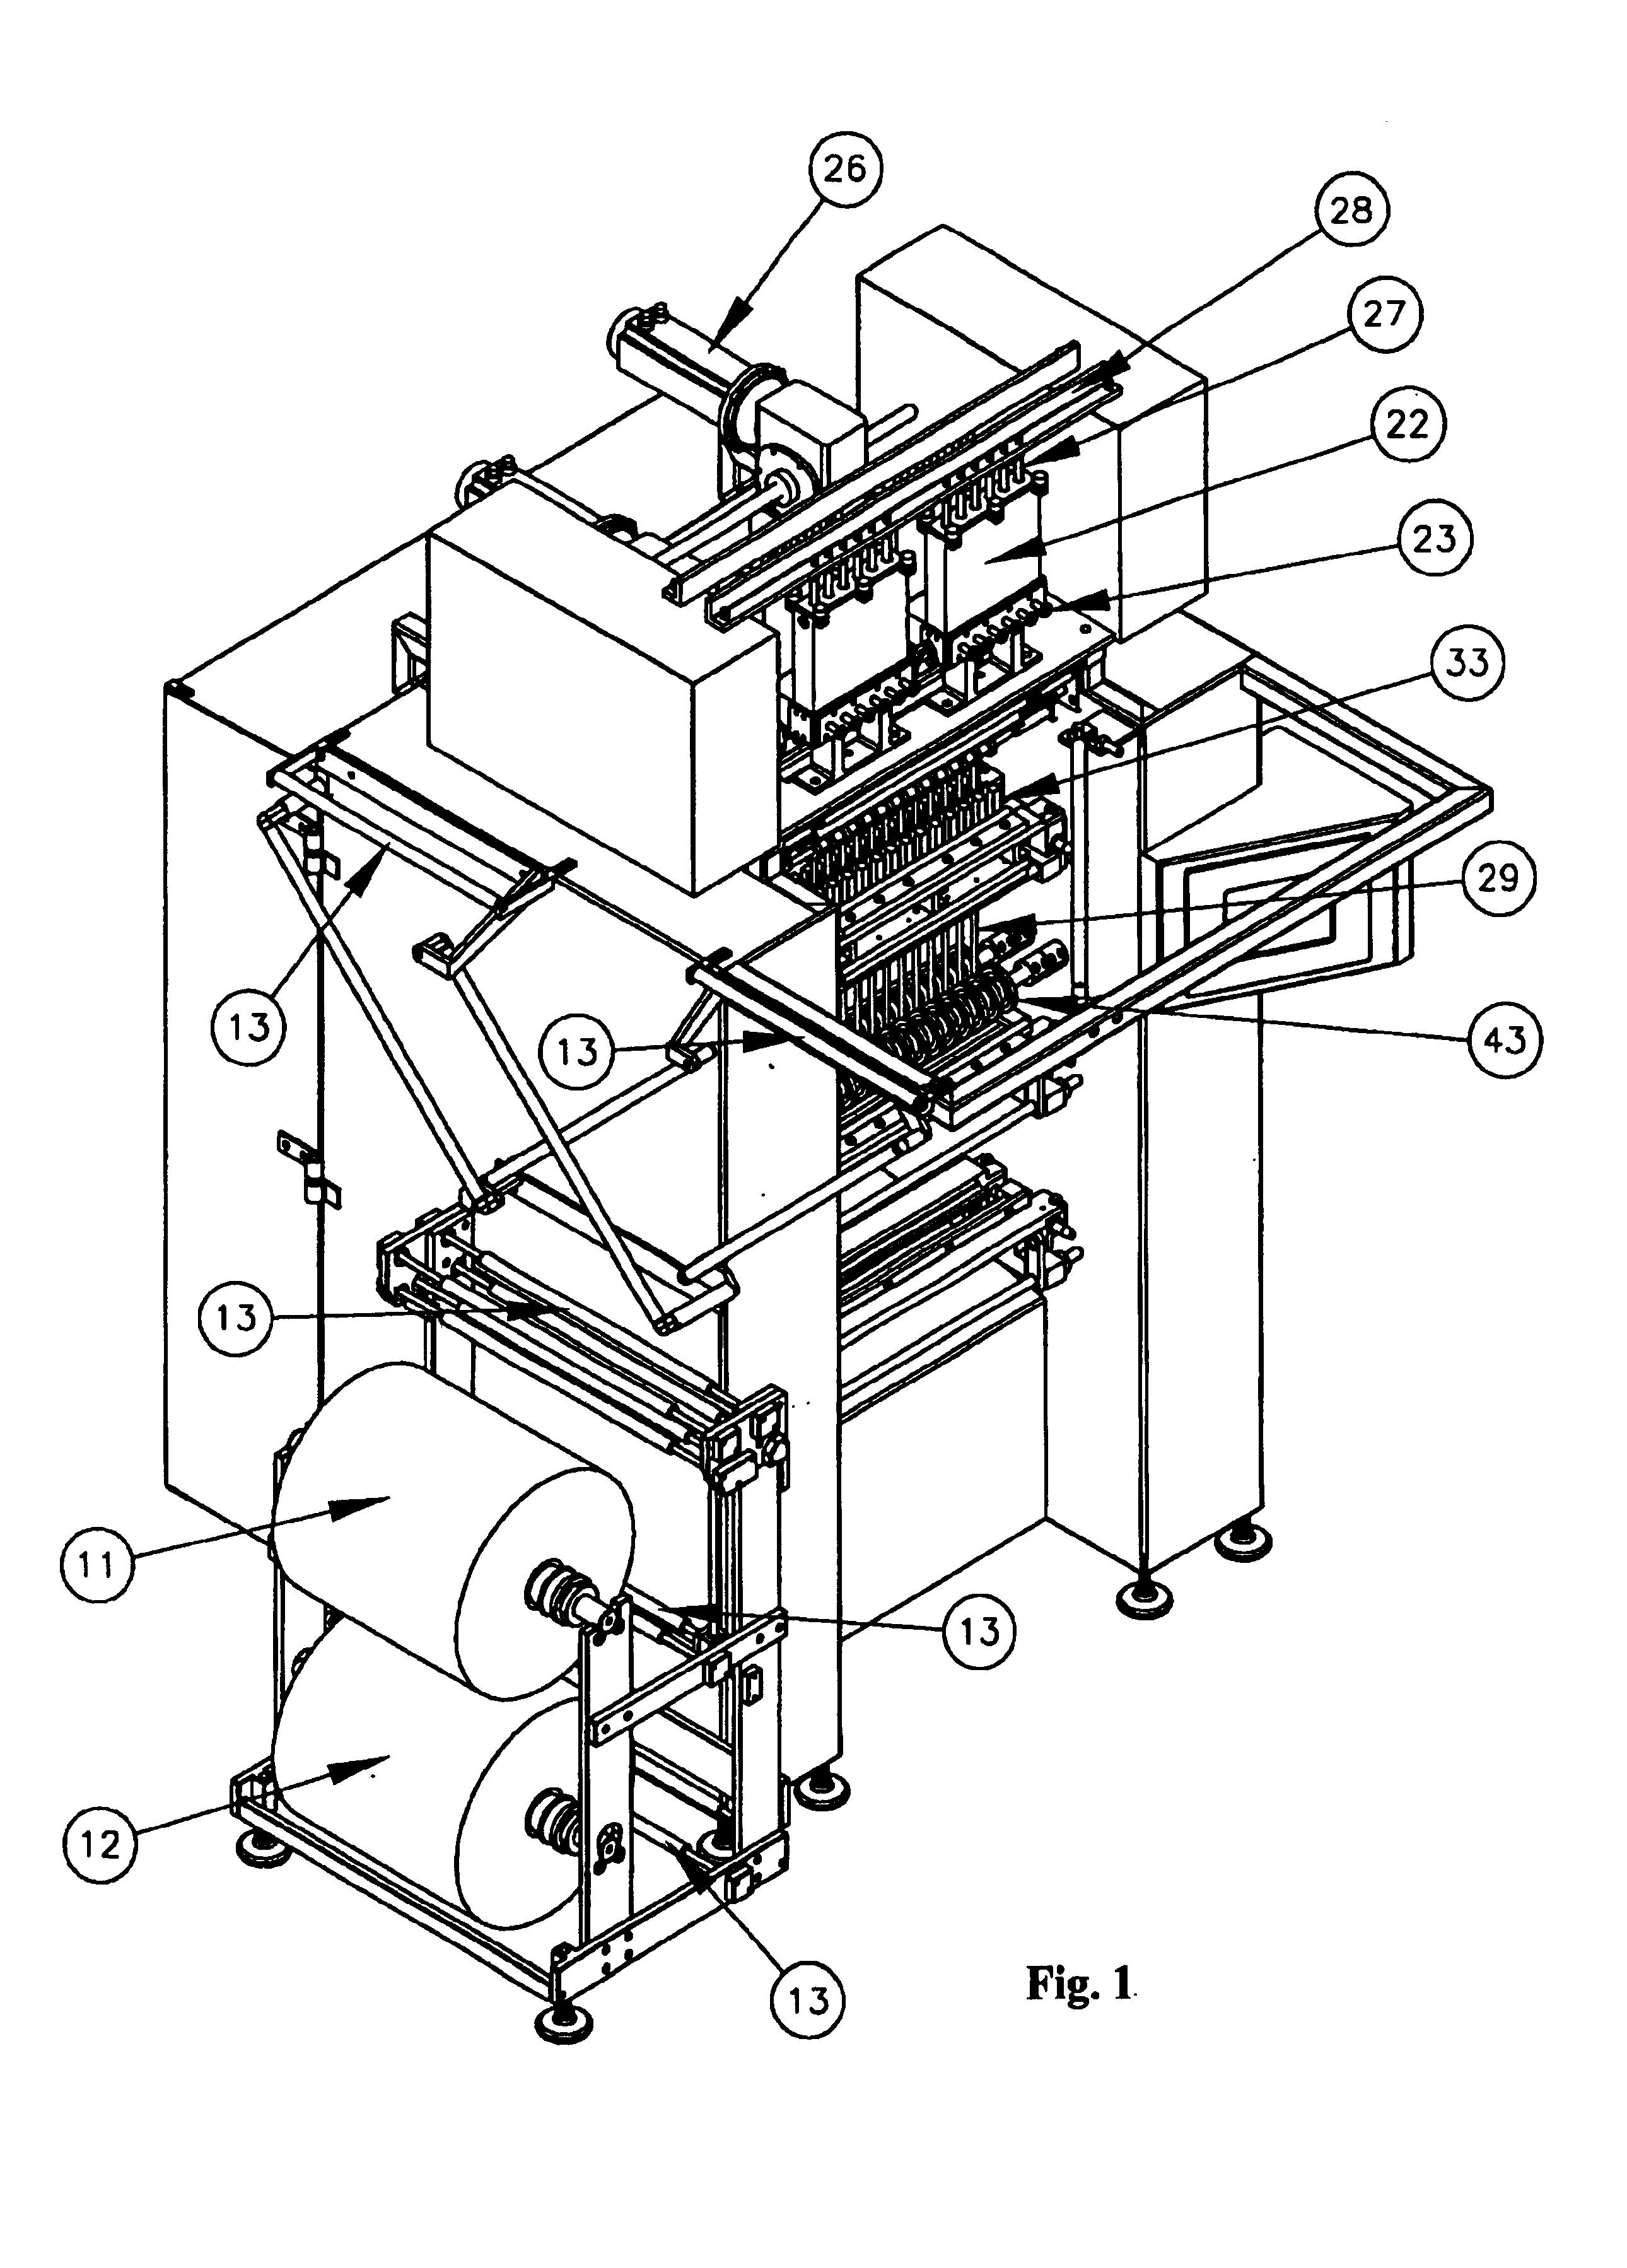 High-speed continuous action form-fill-seal machine and methods